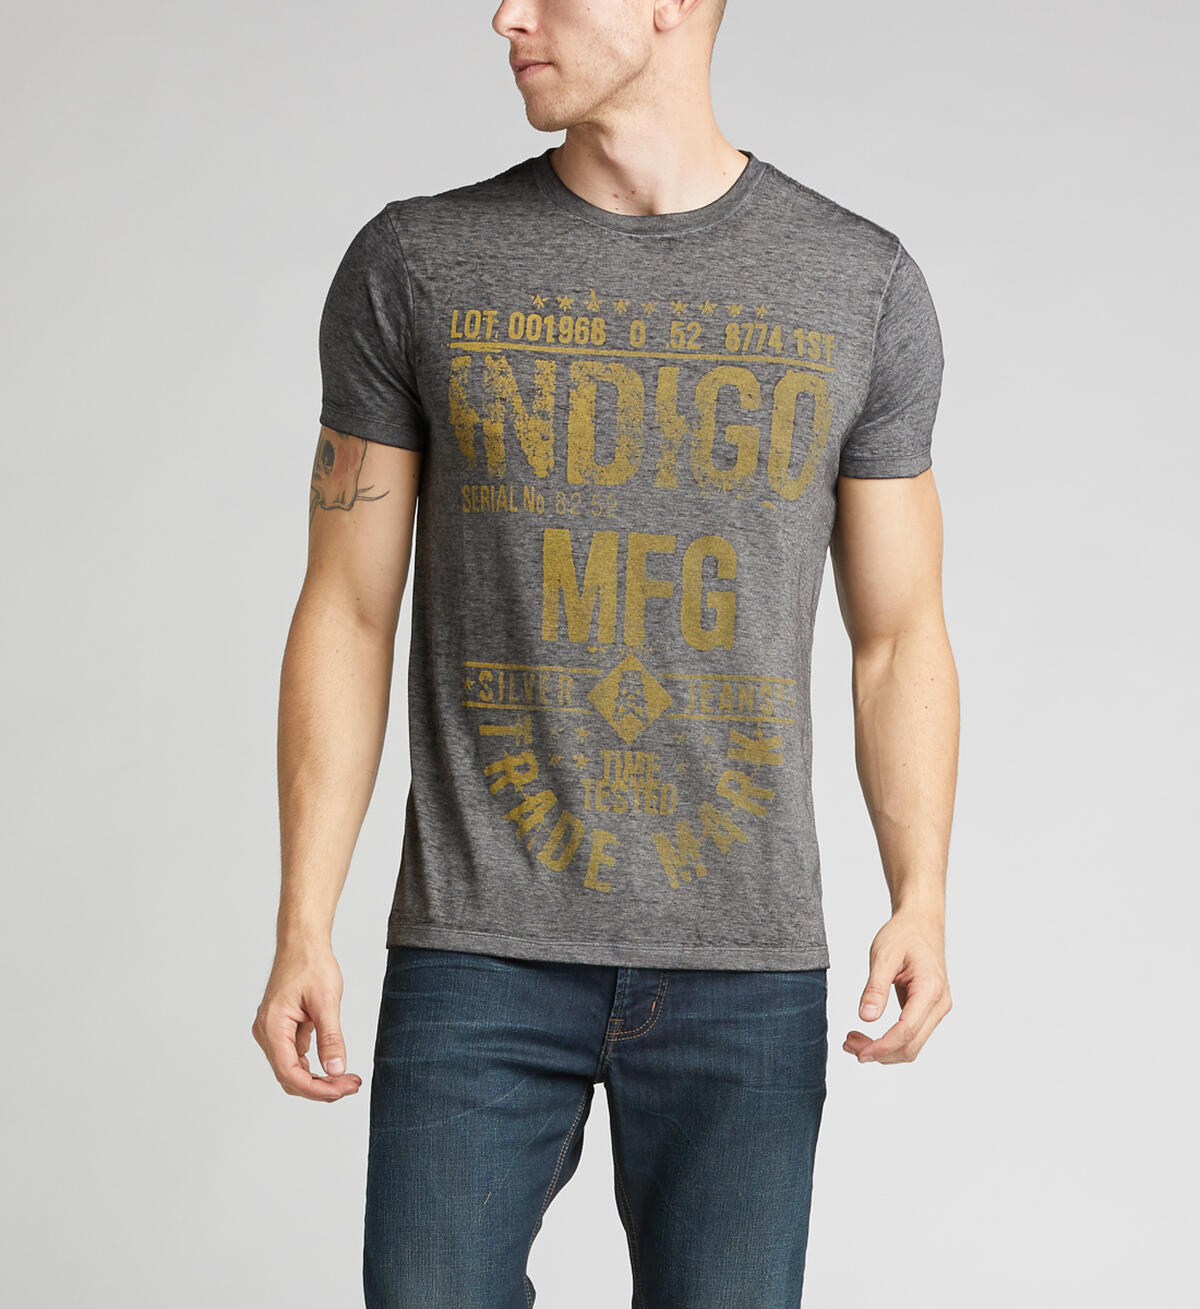 Diego Short-Sleeve Graphic Tee, , hi-res image number 0